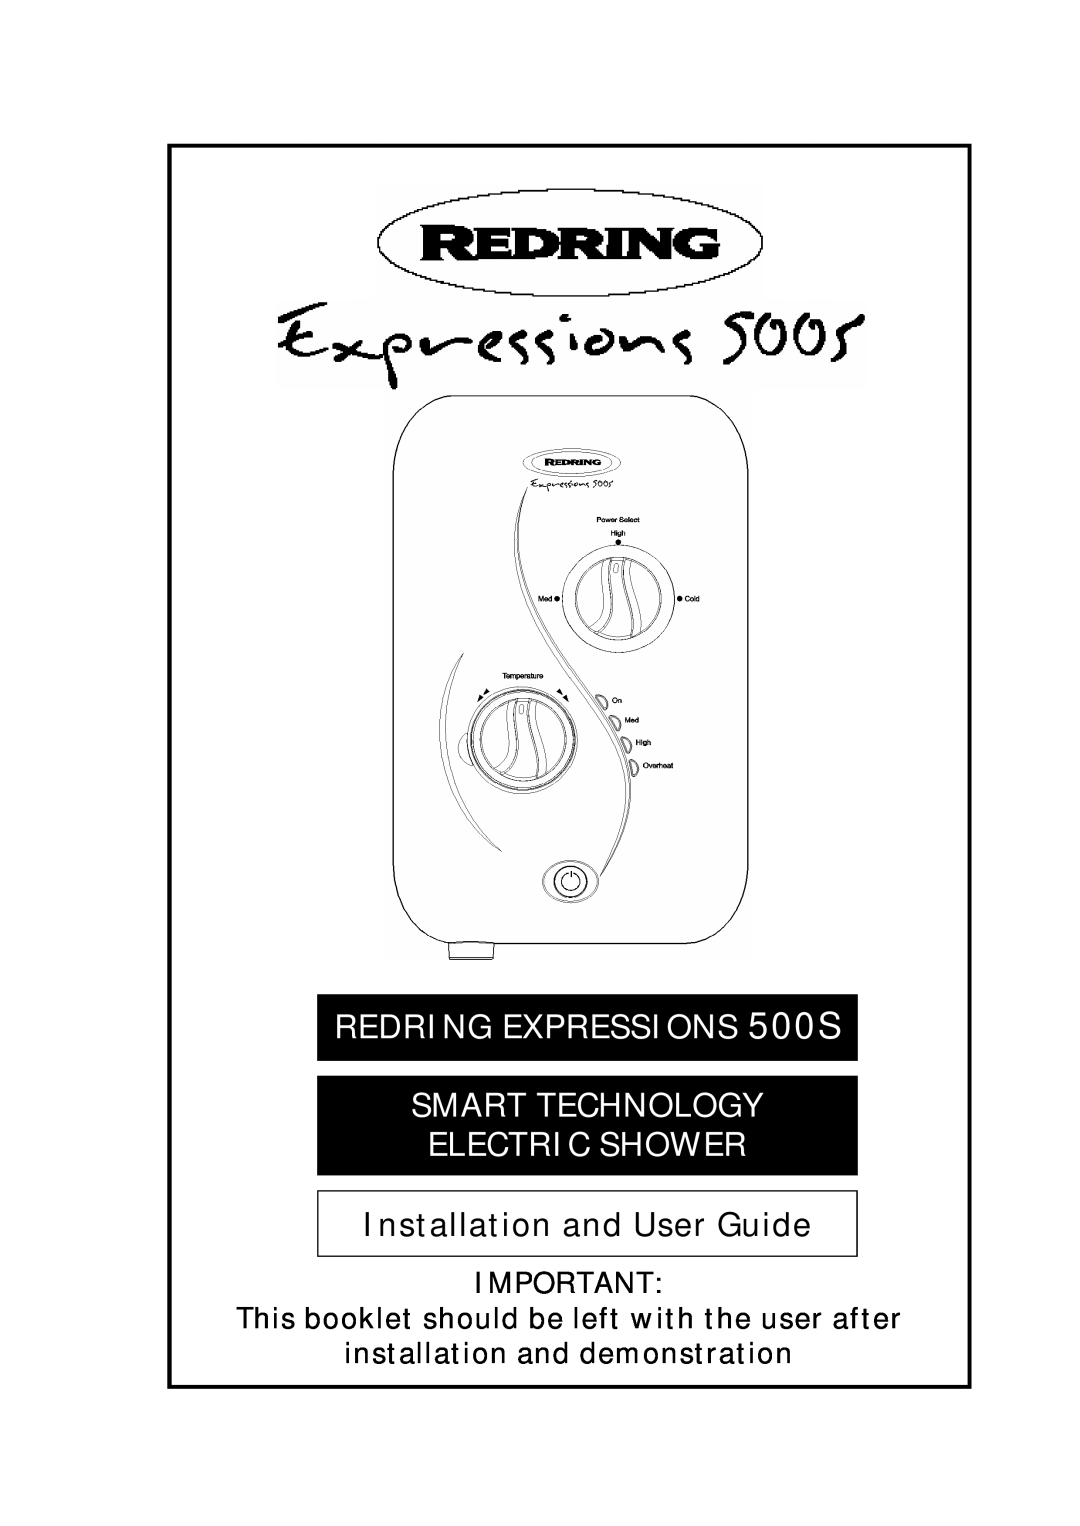 Redring manual REDRING EXPRESSIONS 500S SMART TECHNOLOGY, Electric Shower, Installation and User Guide 